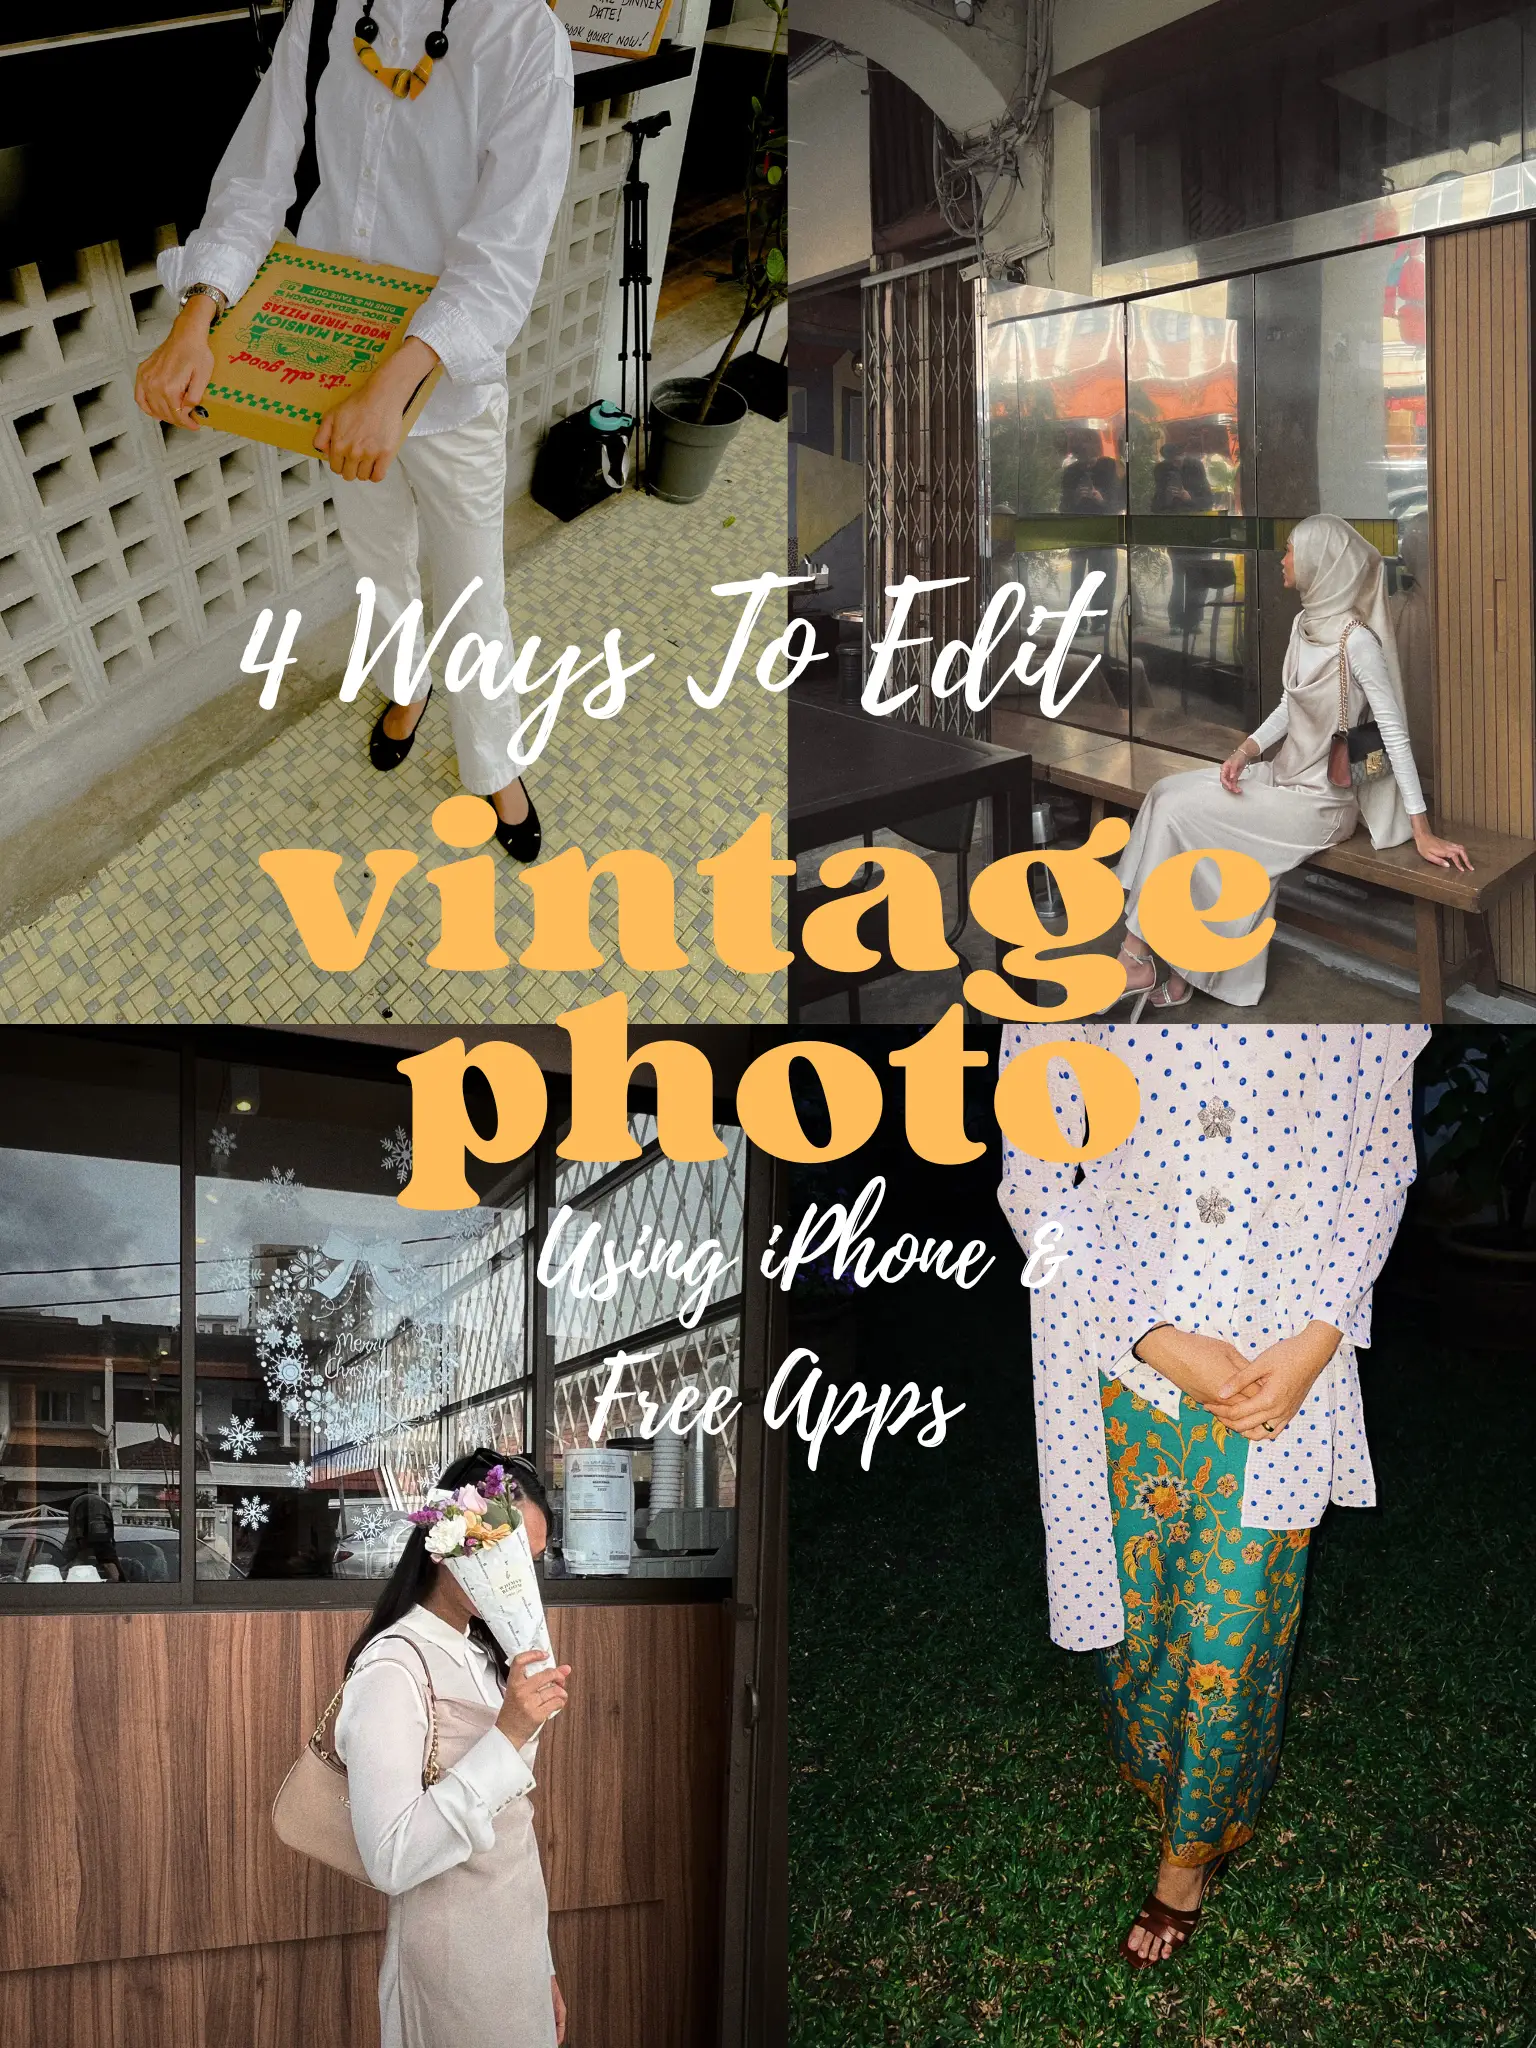 How to add a vintage aesthetic to photos